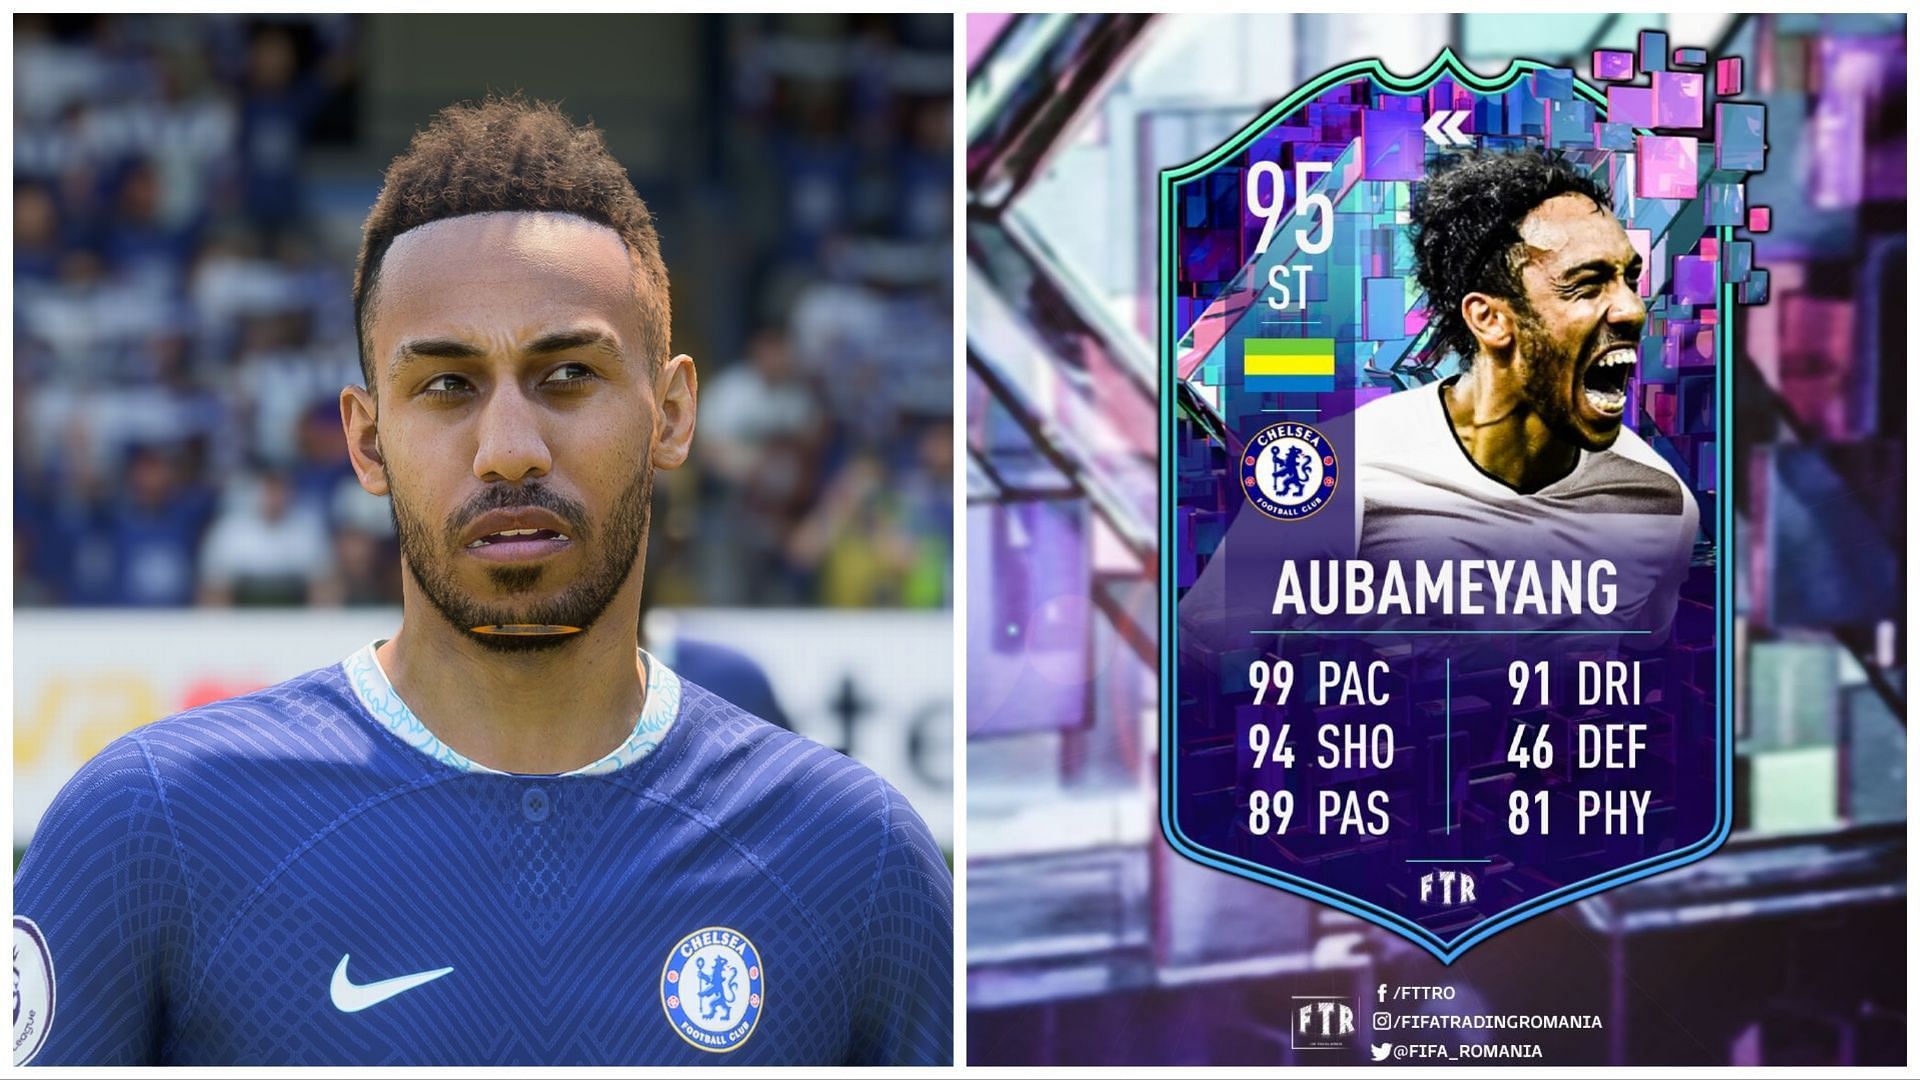 Flashback Aubameyang has been leaked (Images via EA Sports and Twitter/FIFATradingRomania)